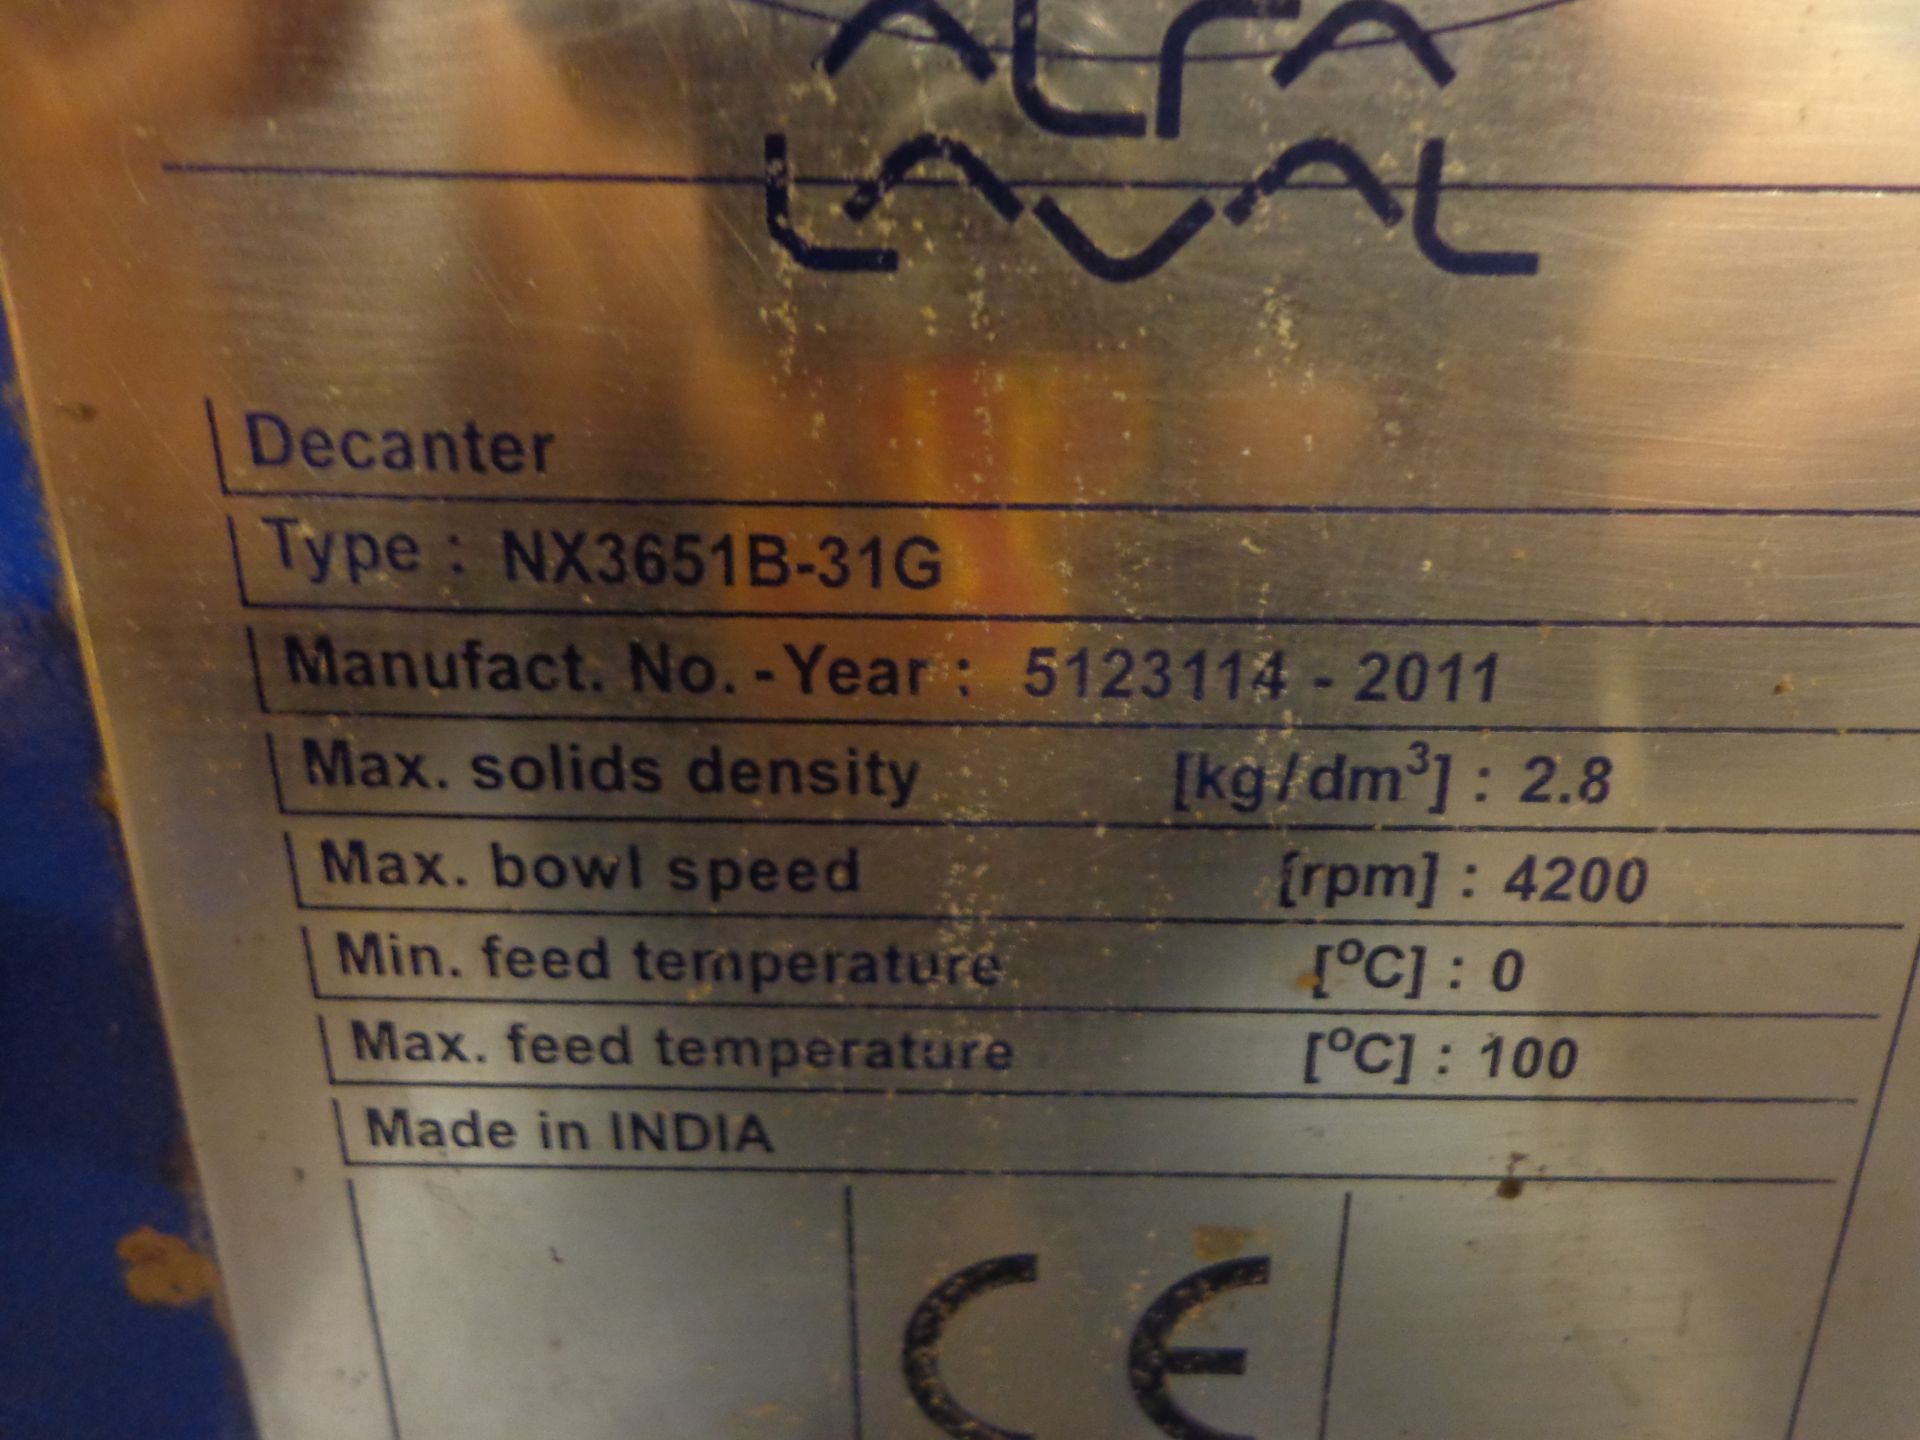 2011 ALFA LAVAL DECANTER, TYPE NX3651B-316 SN. 5123114 (SOLD SUBJECT TO BULK BID OFFERING) - Image 4 of 7